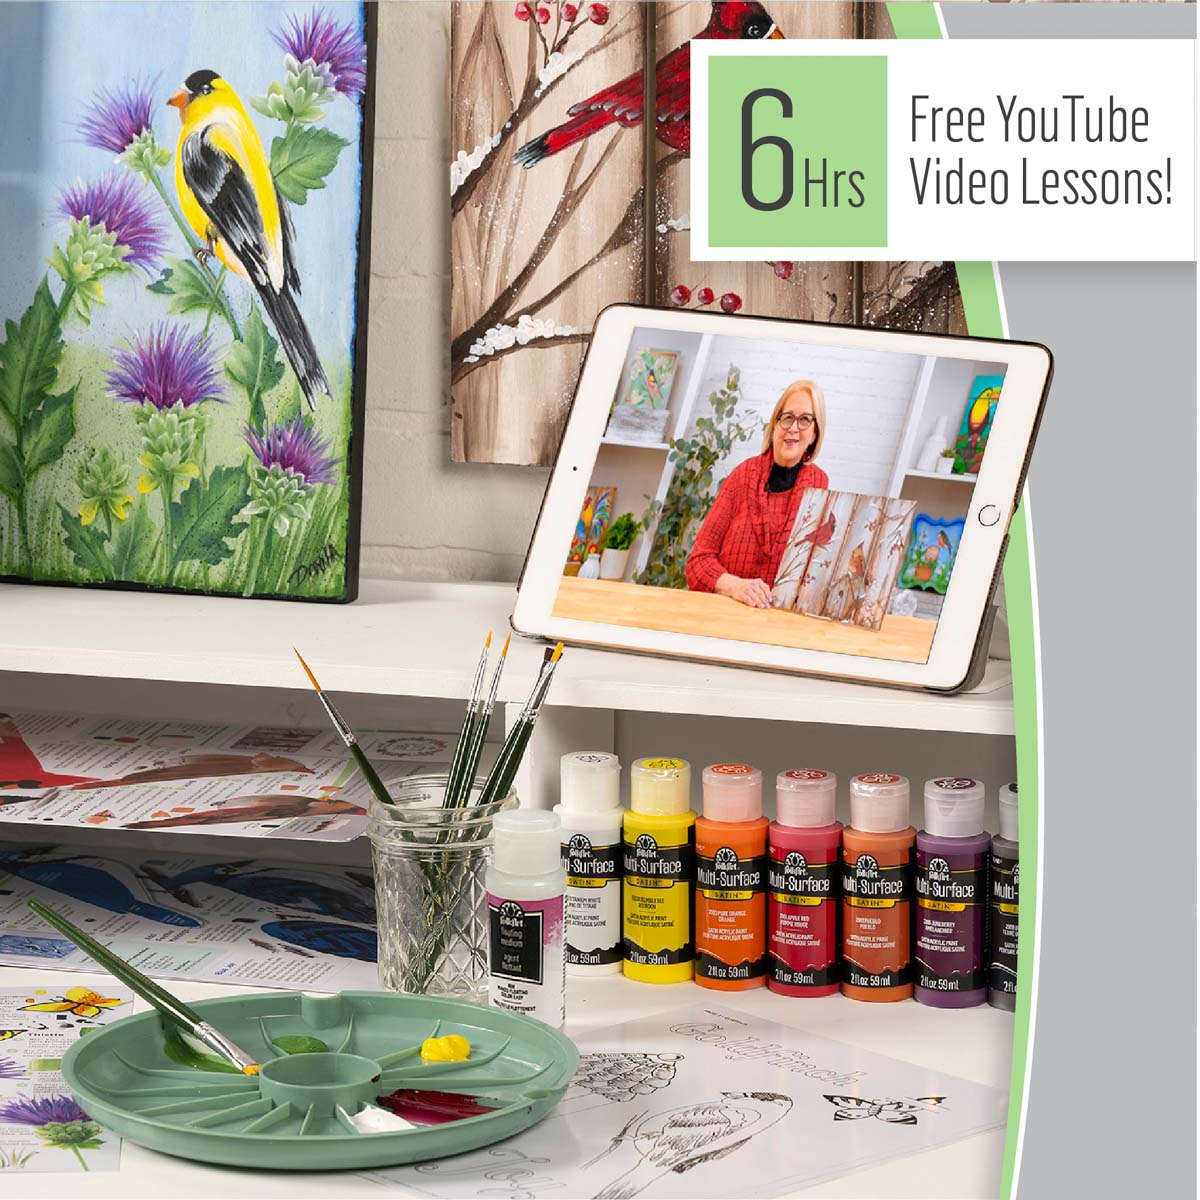 Let's Paint with FolkArt ® One Stroke™ Kit - Birds and Blossoms Surfaces - 90285